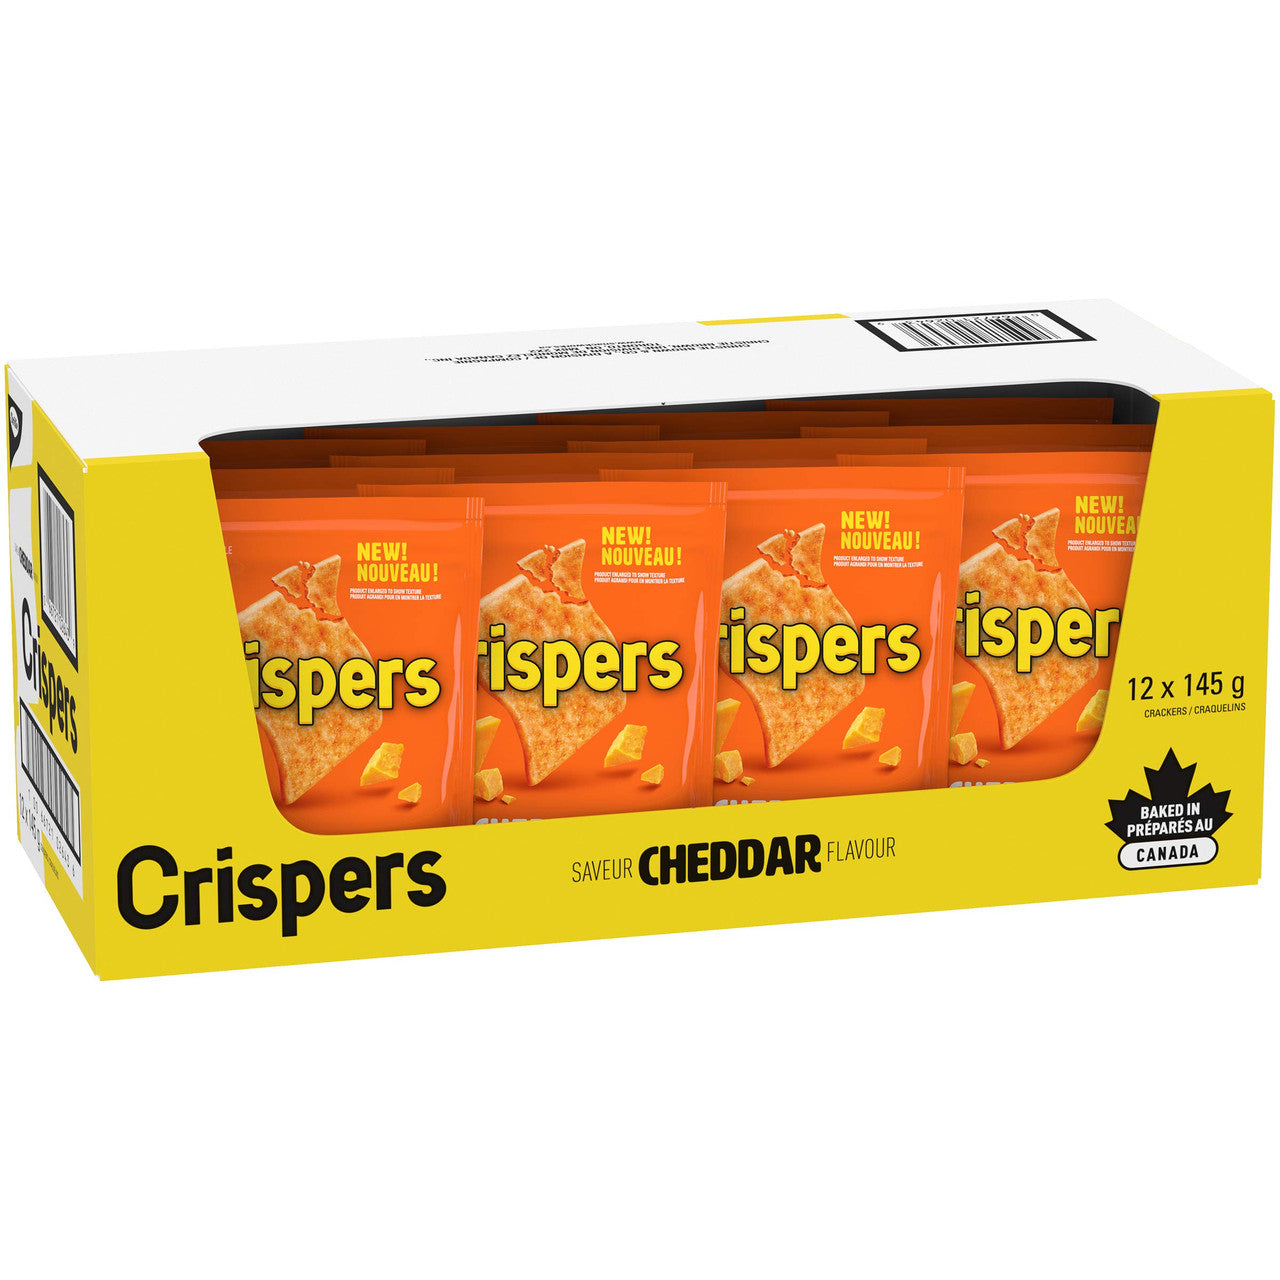 Christie Crispers, Cheddar Crackers, 145g/5.1 Ounce, (12 Pack), {Imported from Canada}